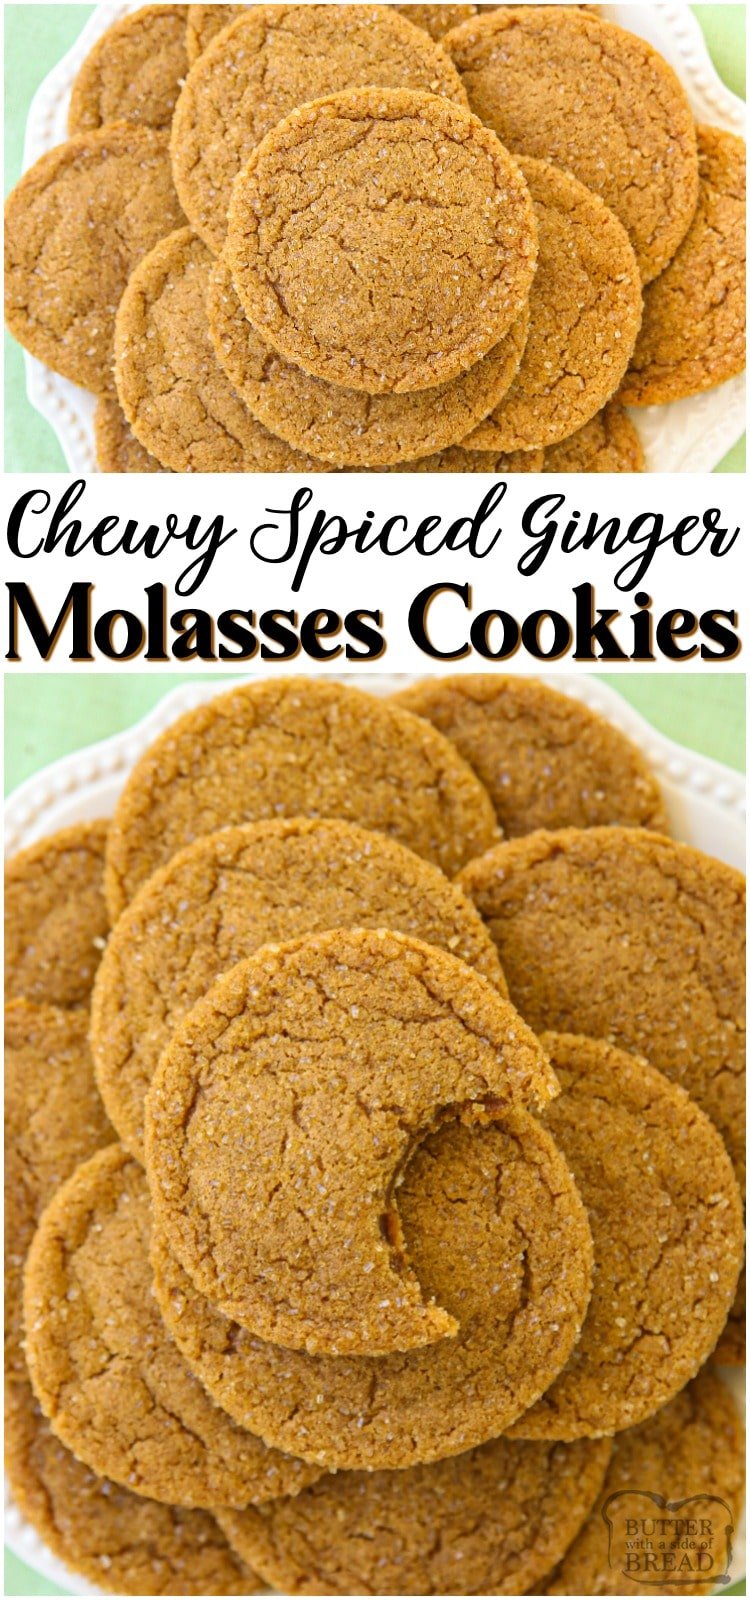 Spiced Ginger Cookies made with molasses and a lovely blend of holiday spices. Perfect soft Ginger Molasses Cookies for Christmas! #ginger #baking #cookies #spiced #molasses #Christmas #holidaybaking #ChristmasCookies from BUTTER WITH A SIDE OF BREAD